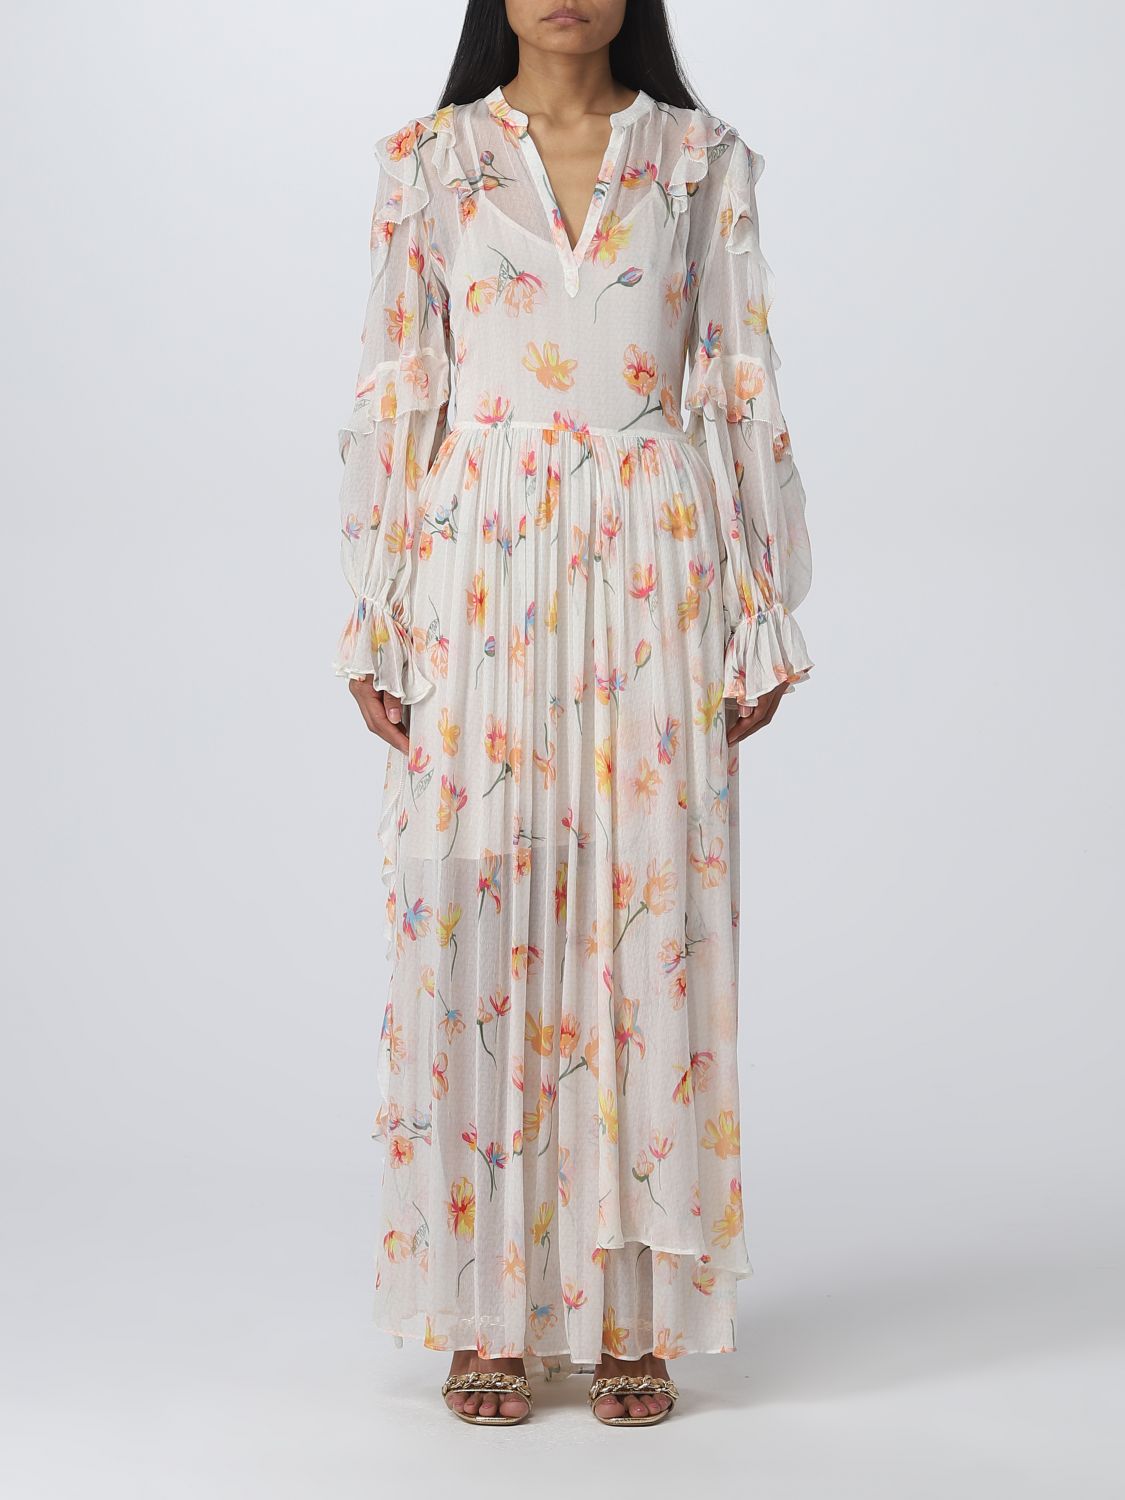 Zadig & Voltaire Floral-print Maxi Dress In Yellow Cream | ModeSens